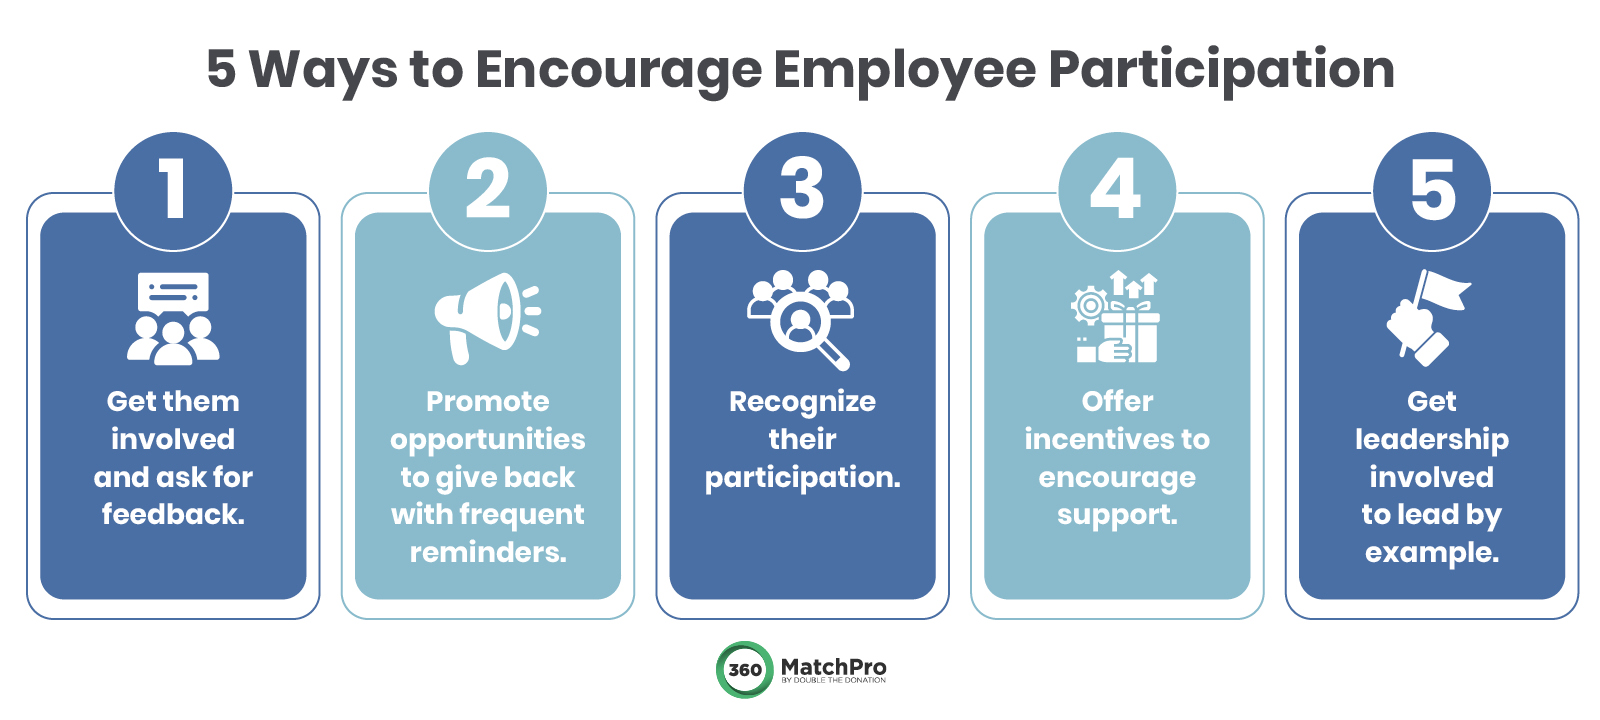 Five ways to encourage your employees to participate in CSR programs like volunteer time off (detailed in the text below).